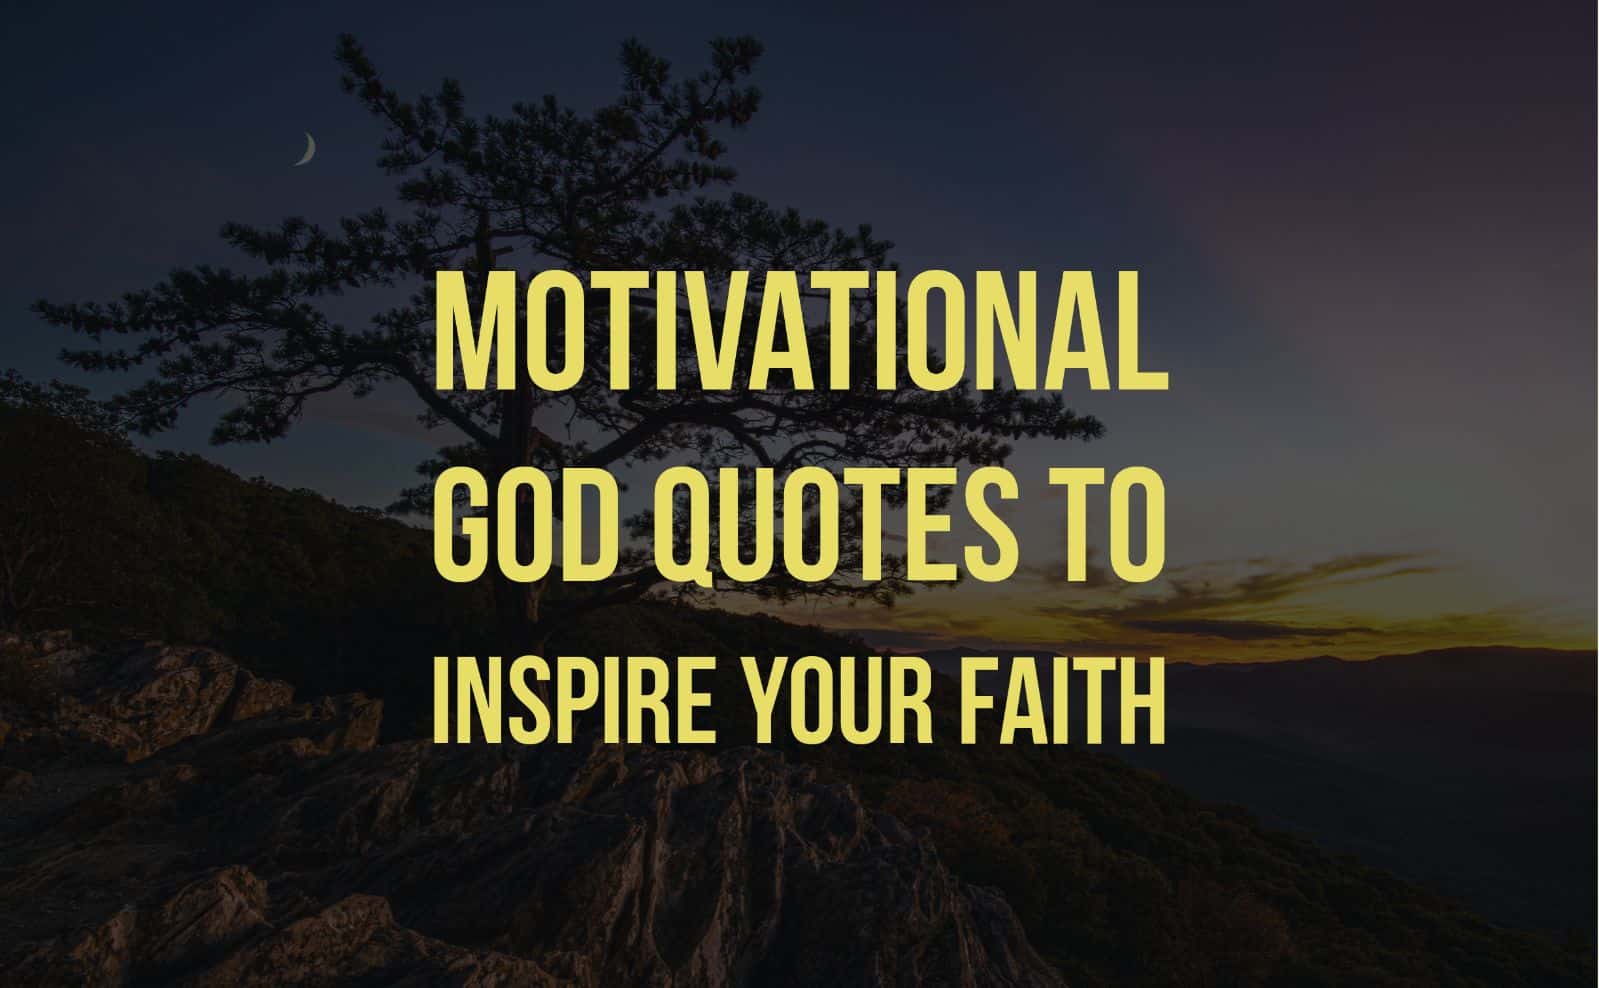 quotes about believing in god